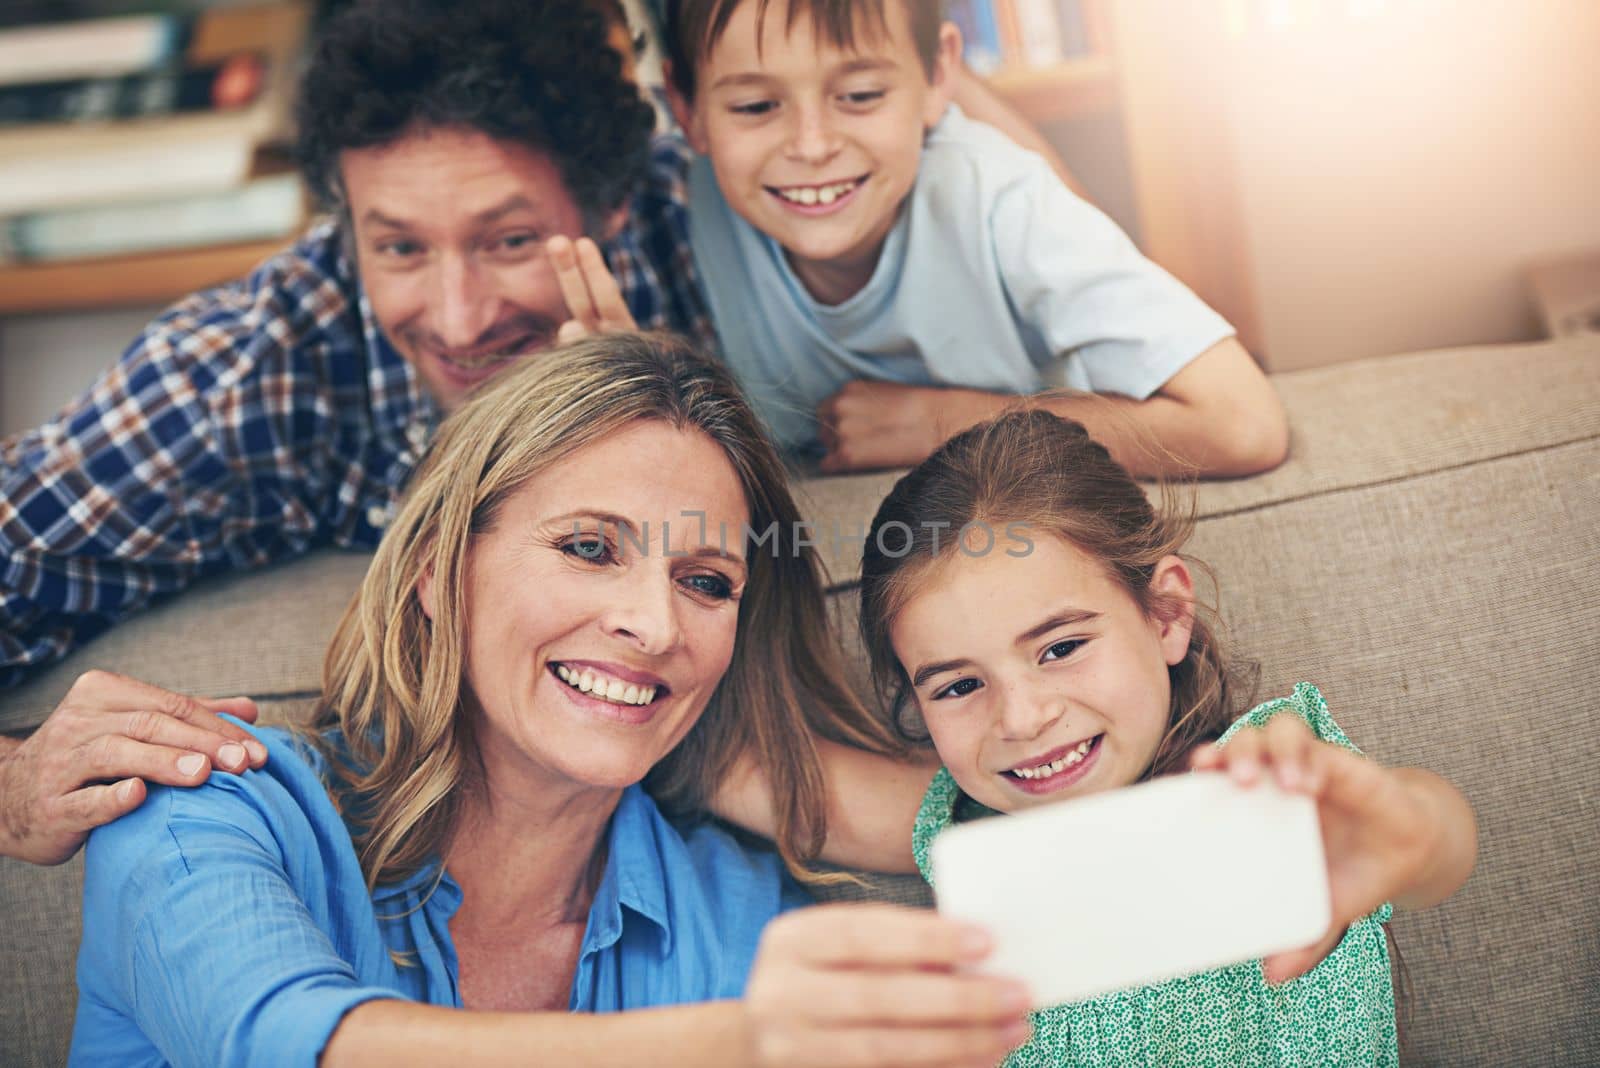 Family time is selfie time. a happy family taking a selfie together on a mobile phone at home